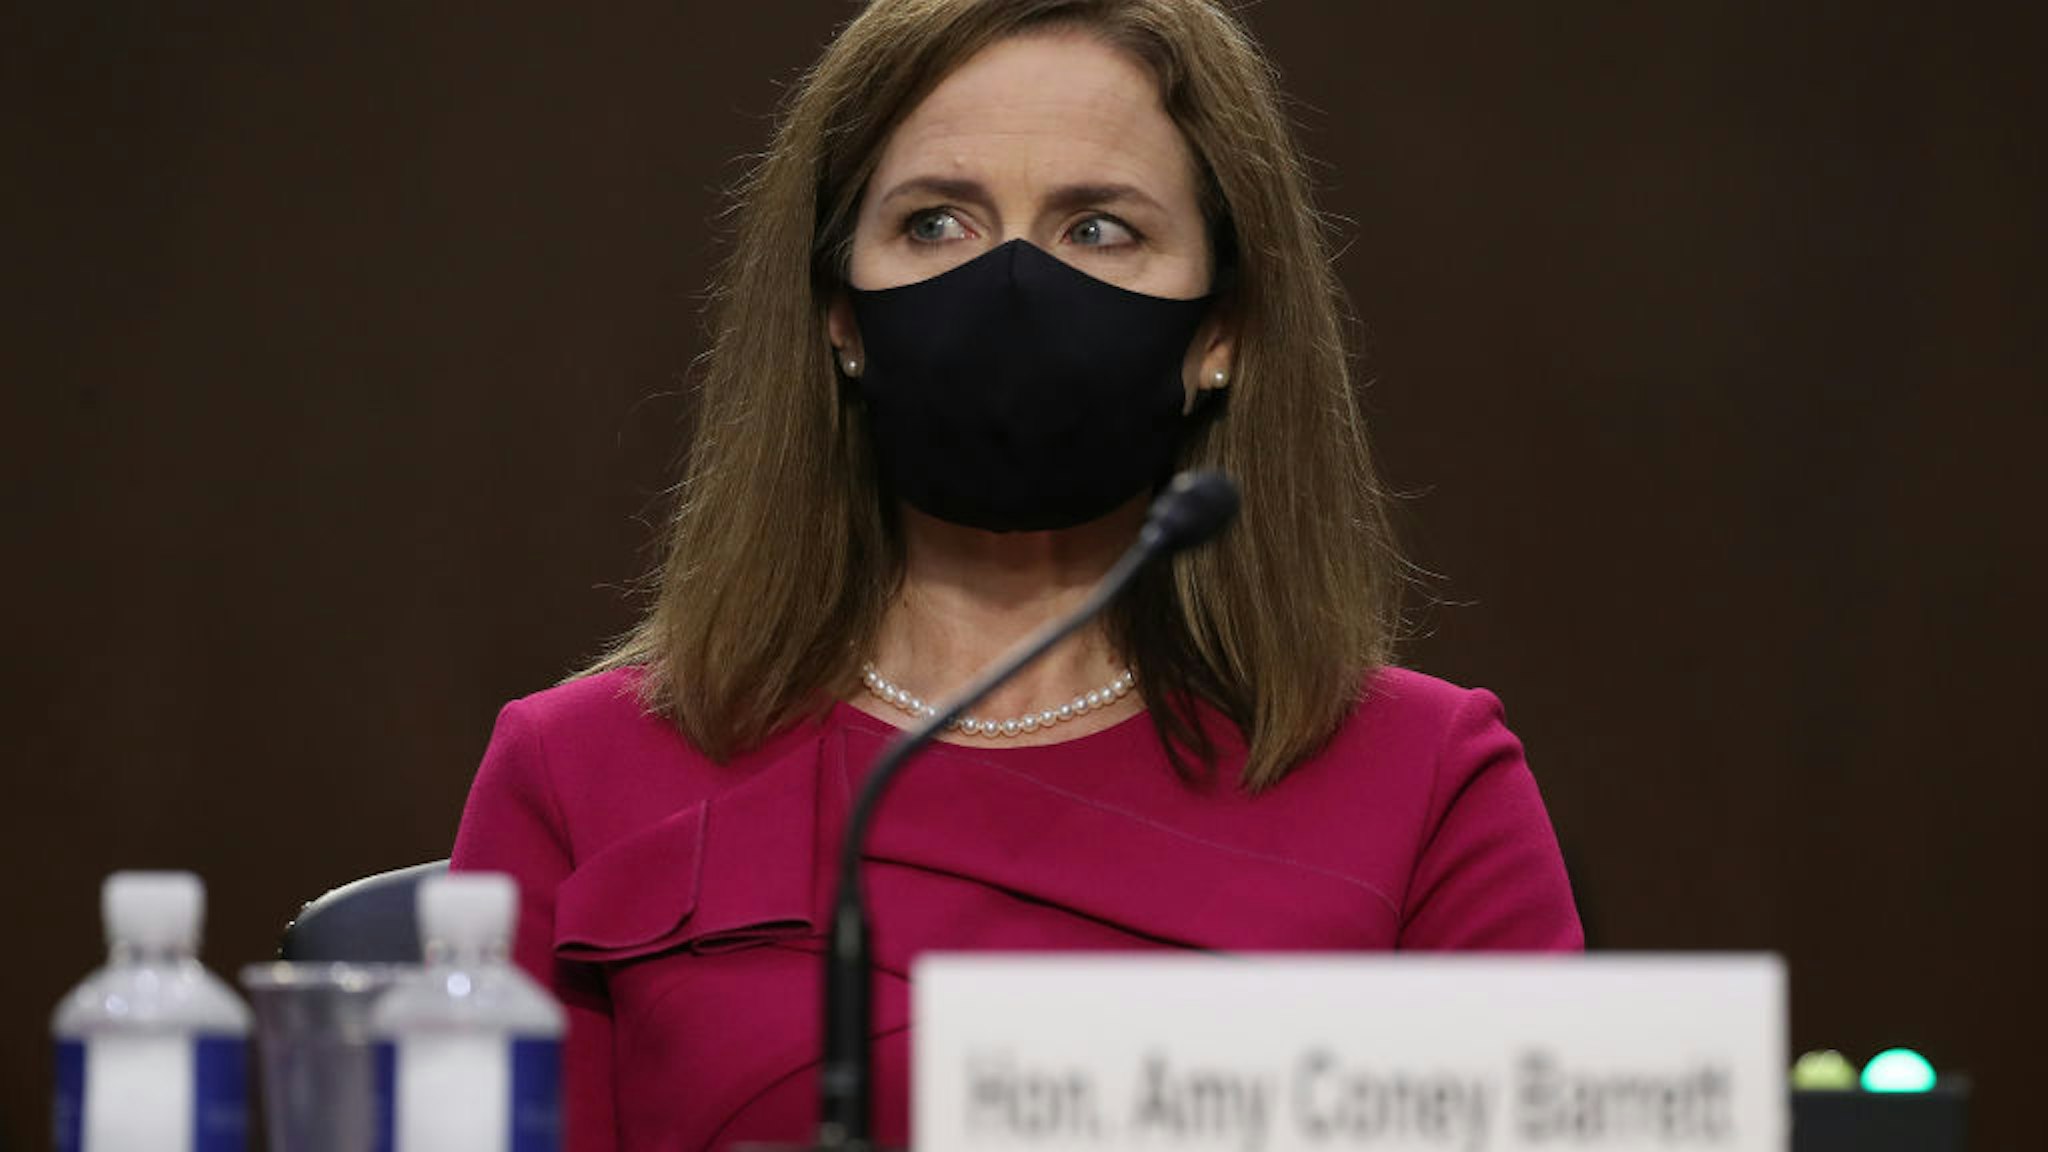 Supreme Court nominee Judge Amy Coney Barrett attends her Senate Judiciary Committee confirmation hearing on Capitol Hill on October 12, 2020 in Washington, DC.